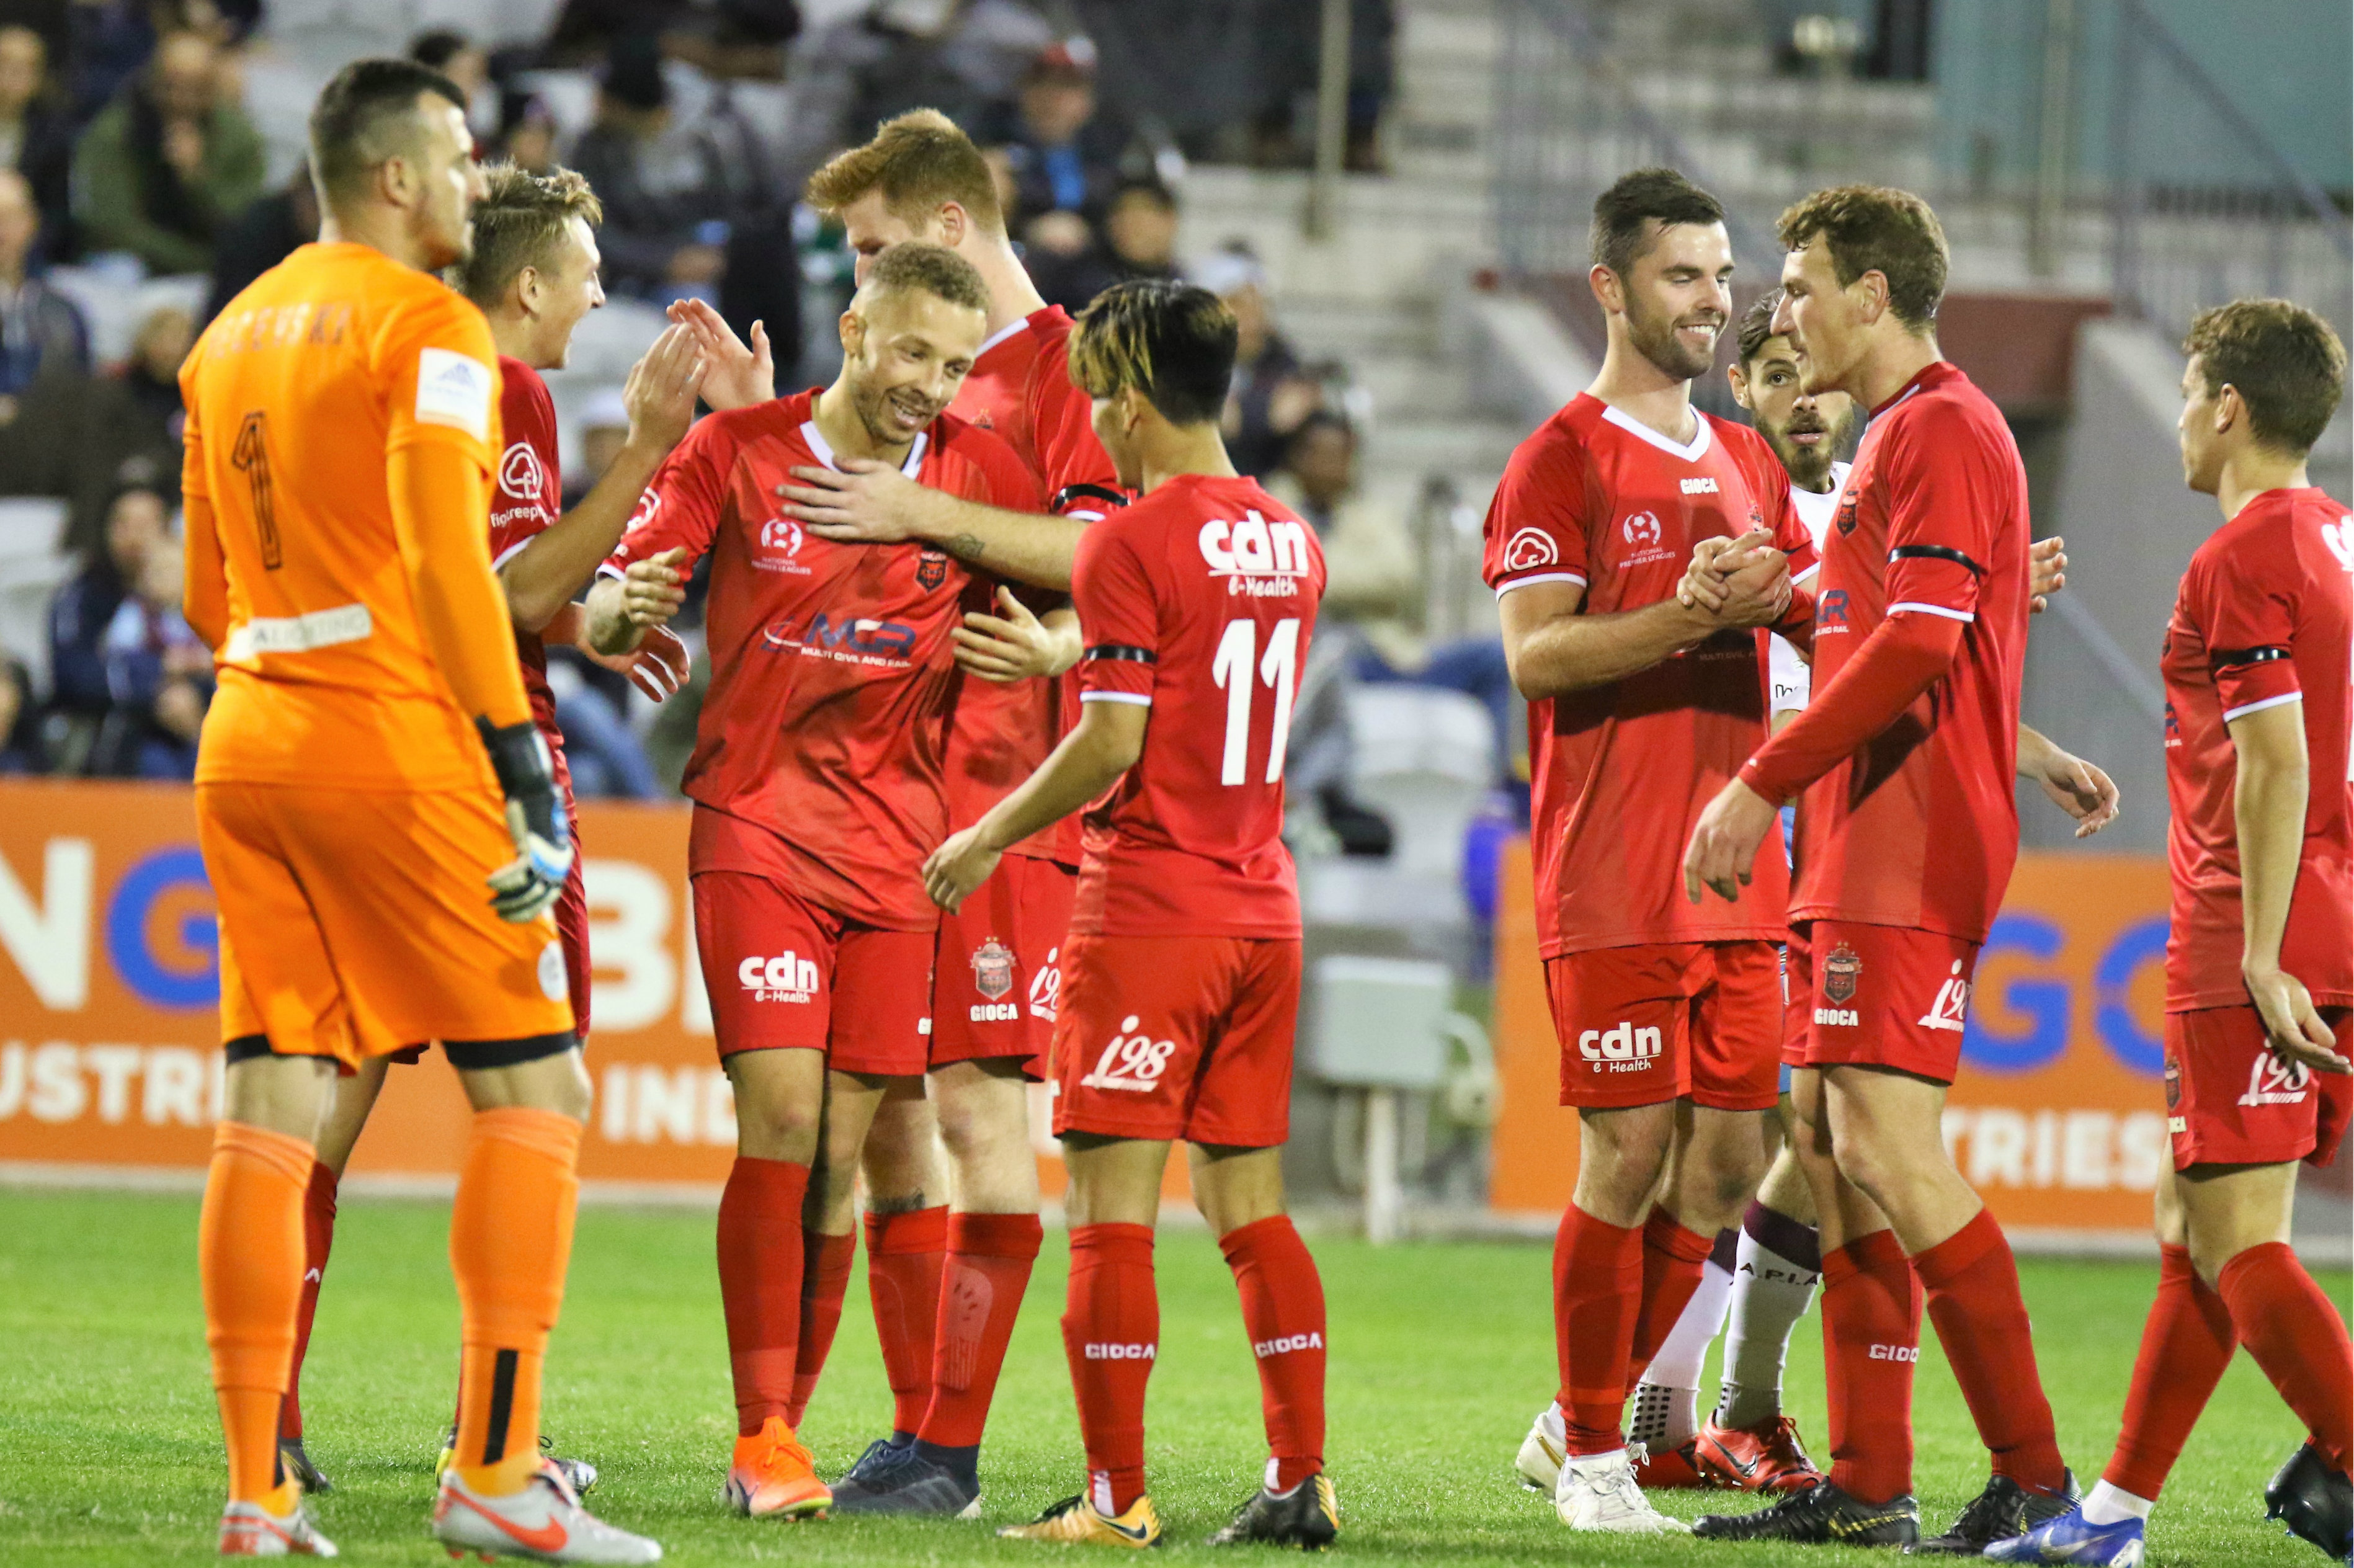 Wollongong Wolves celebrate a goal - Pic courtesy of Football NSW